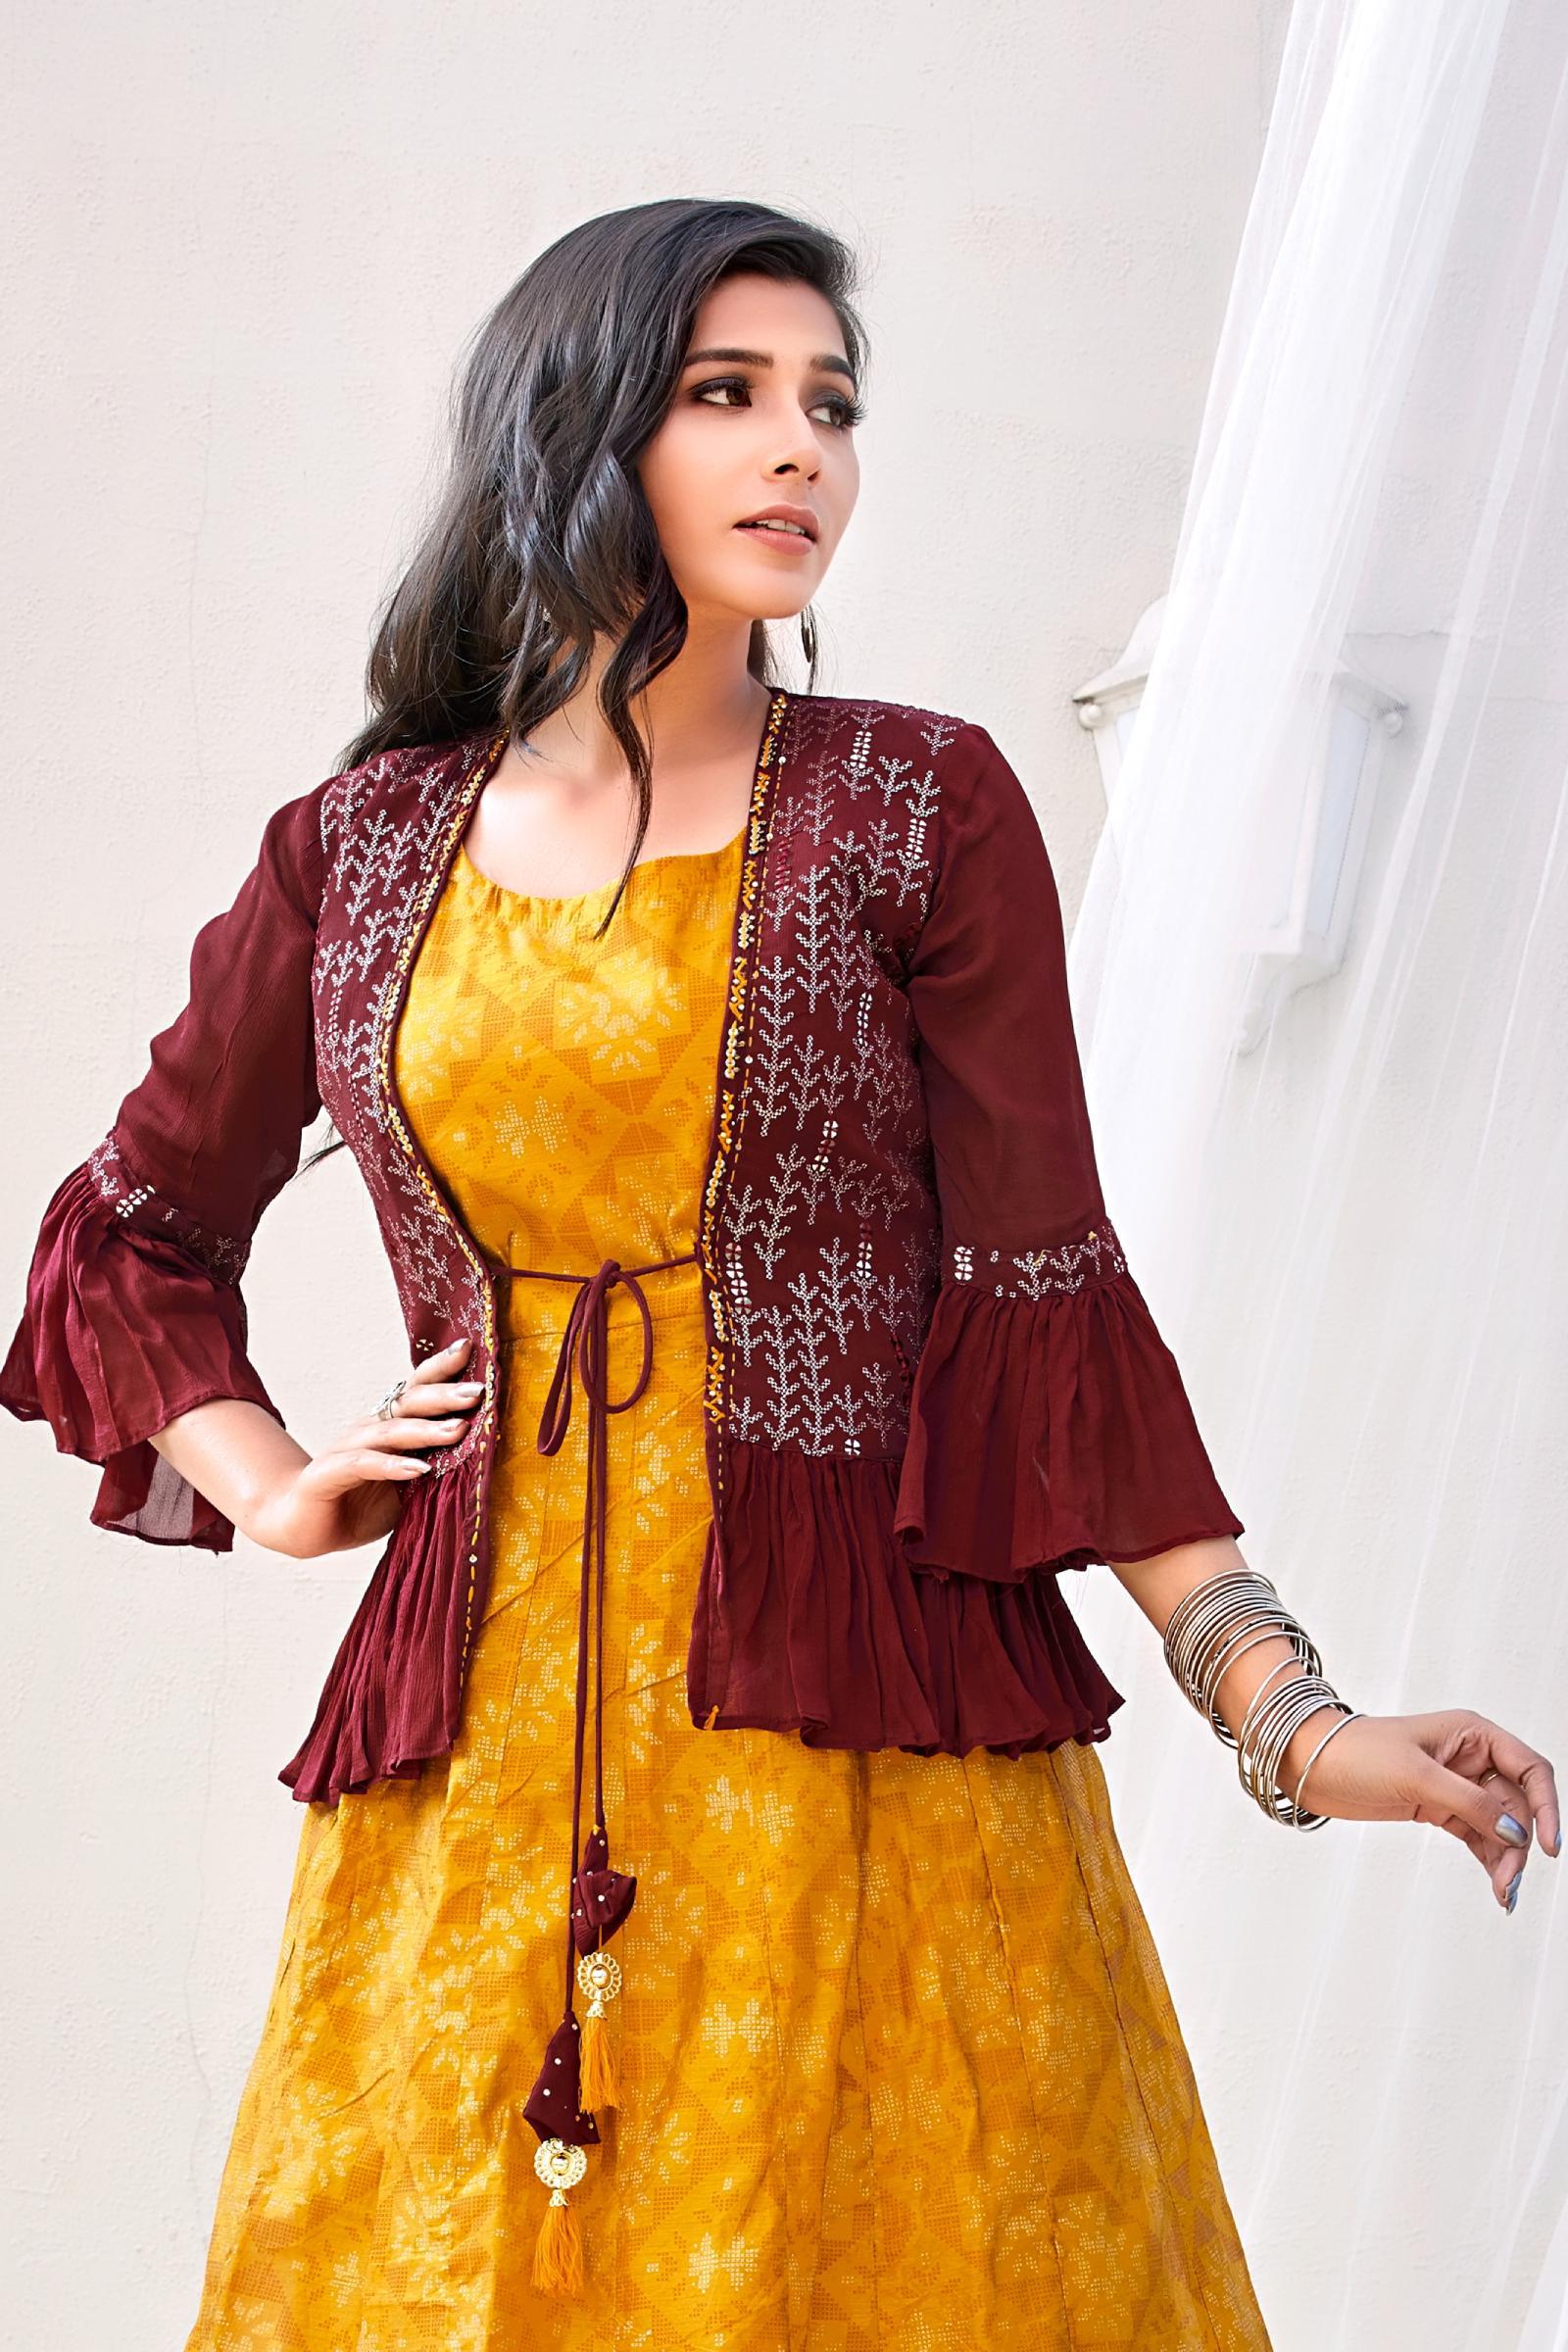 Buy Define Fashions Women Cotton Lycra Kurti with Jacket Latest Yellow Kurti  Designed for Casual Function wear at Amazon.in